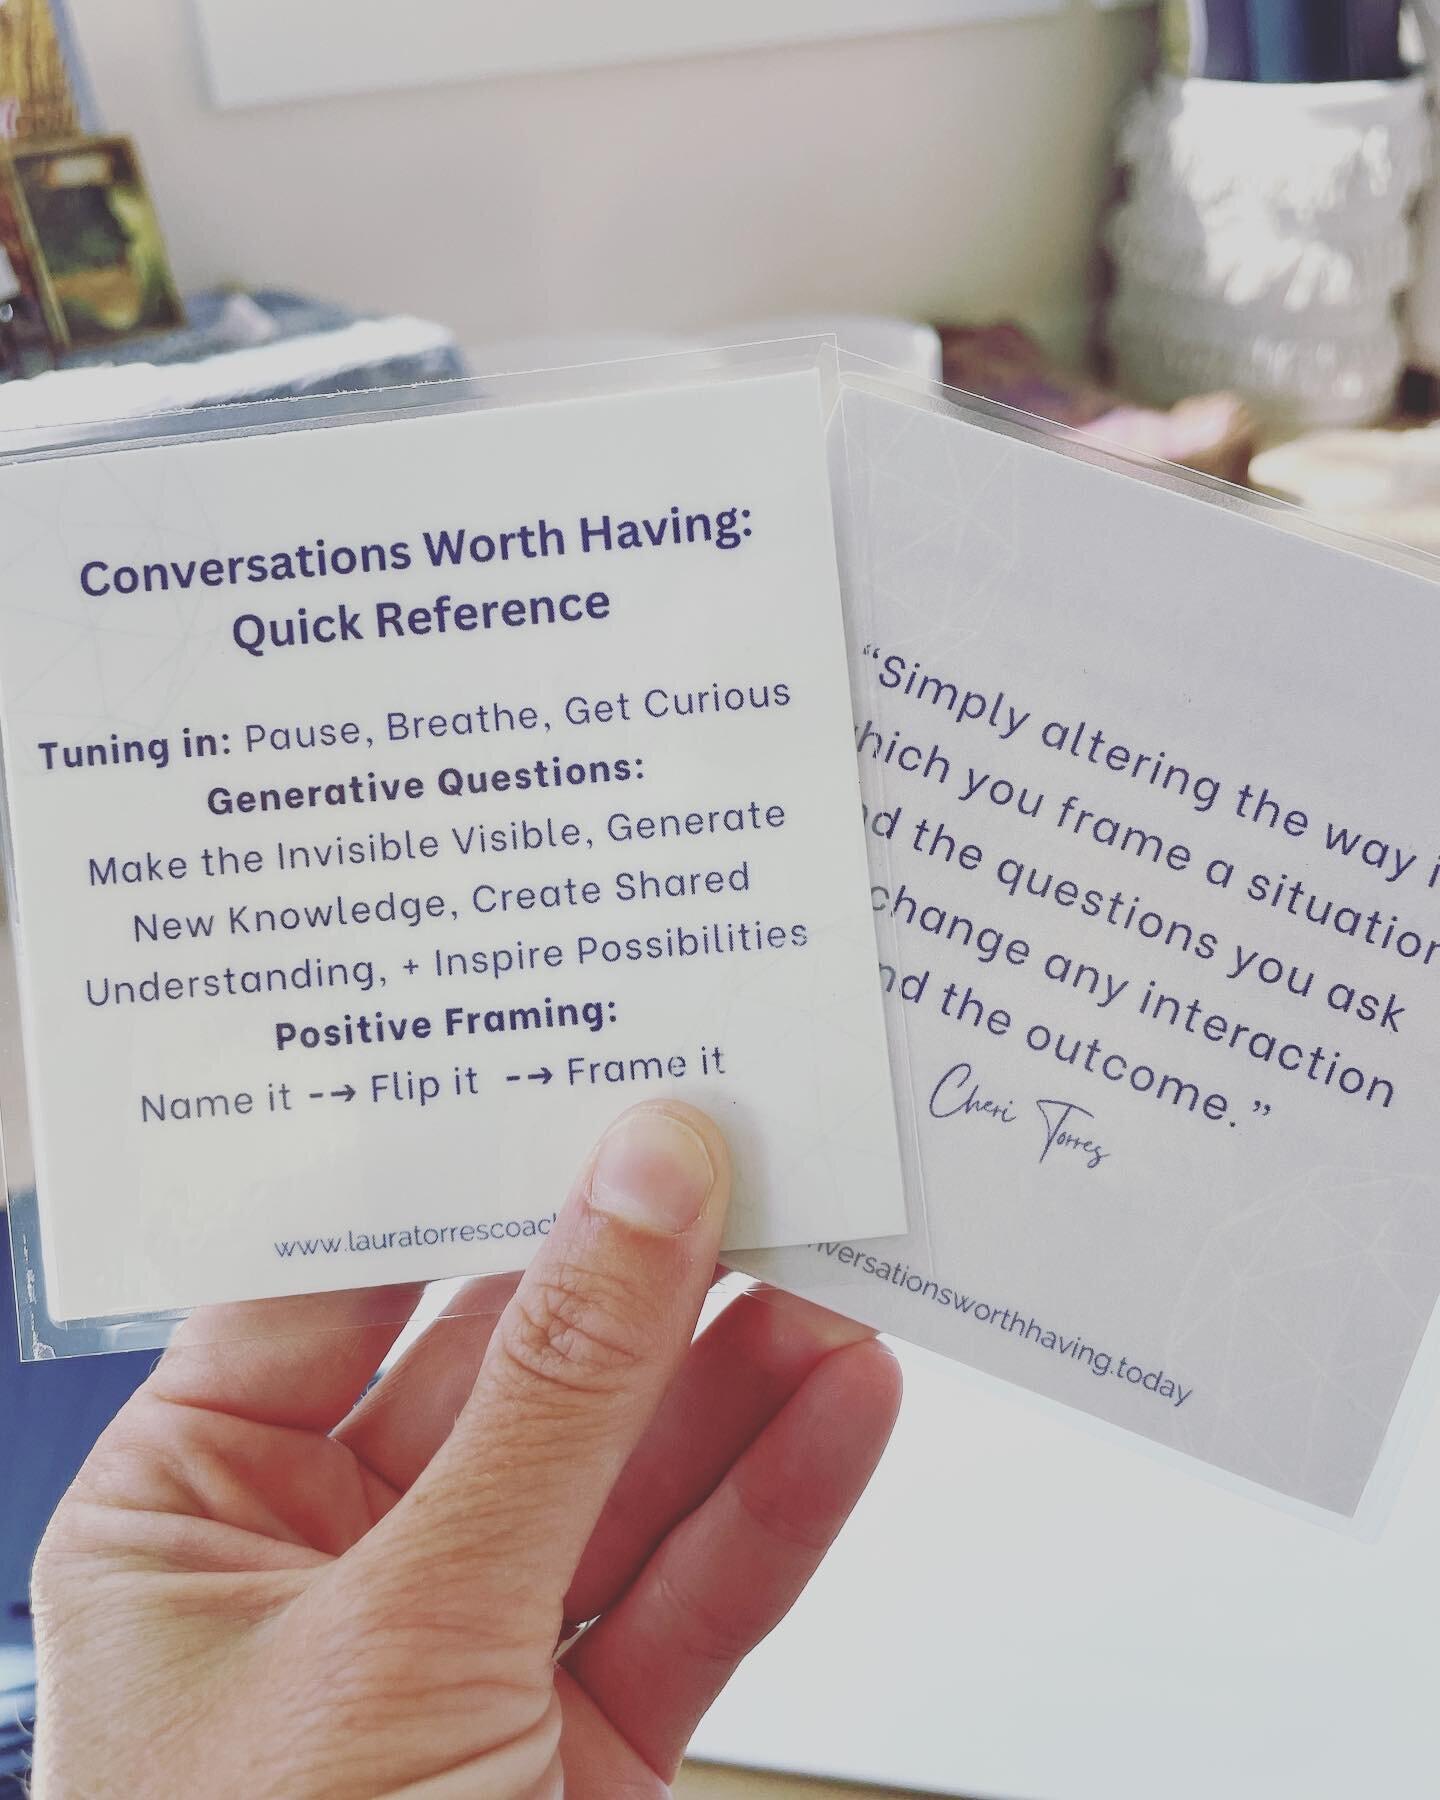 Check out these new Conversations Worth Having (CWH) quick reference cards I made! 

It&rsquo;s been so fun planning and prepping for an experiential CWH playshop with @reachingresolutionpllc !! Can&rsquo;t wait to explore with y&rsquo;all tomorrow ❤